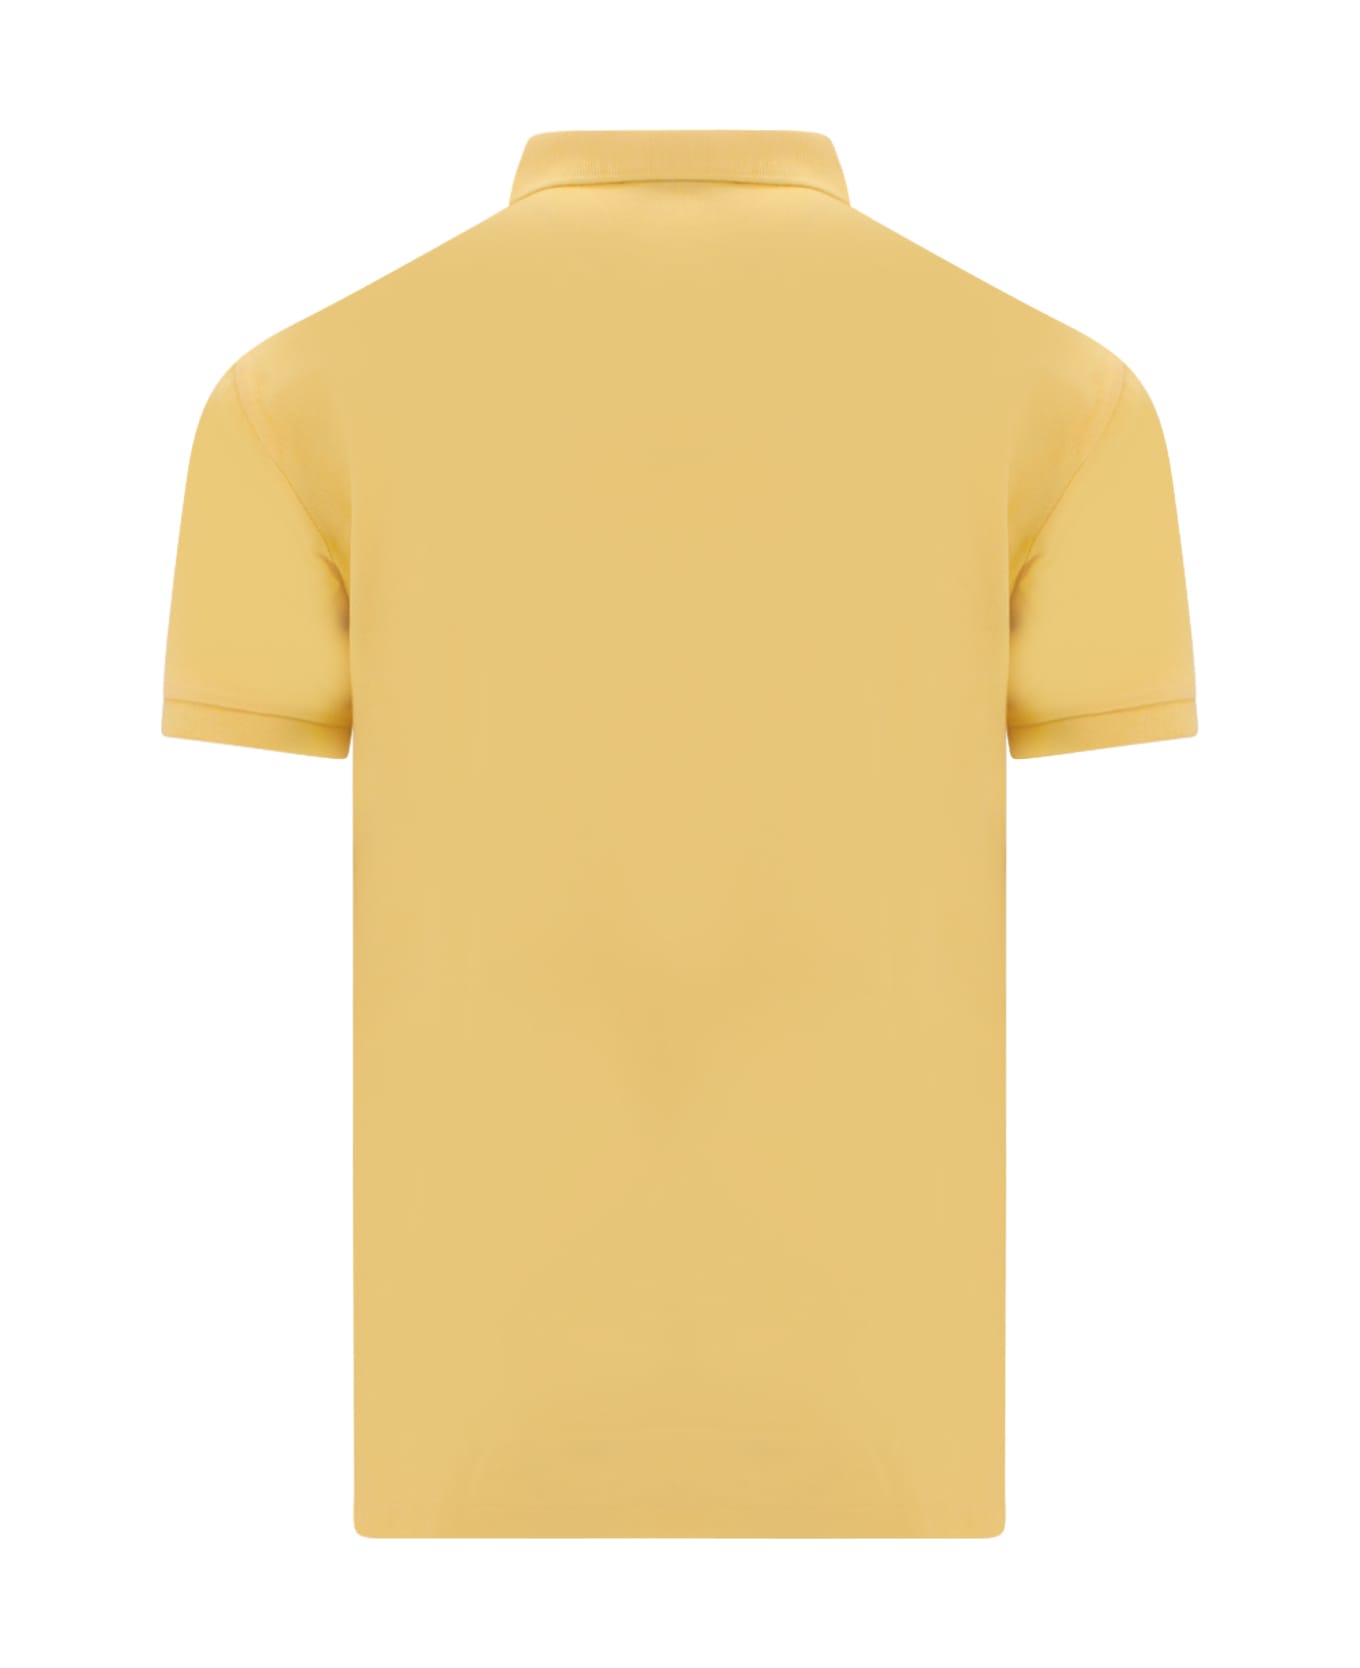 Polo Ralph Lauren Yellow And Light Blue Slim-fit Pique Polo Shirt - Yellow